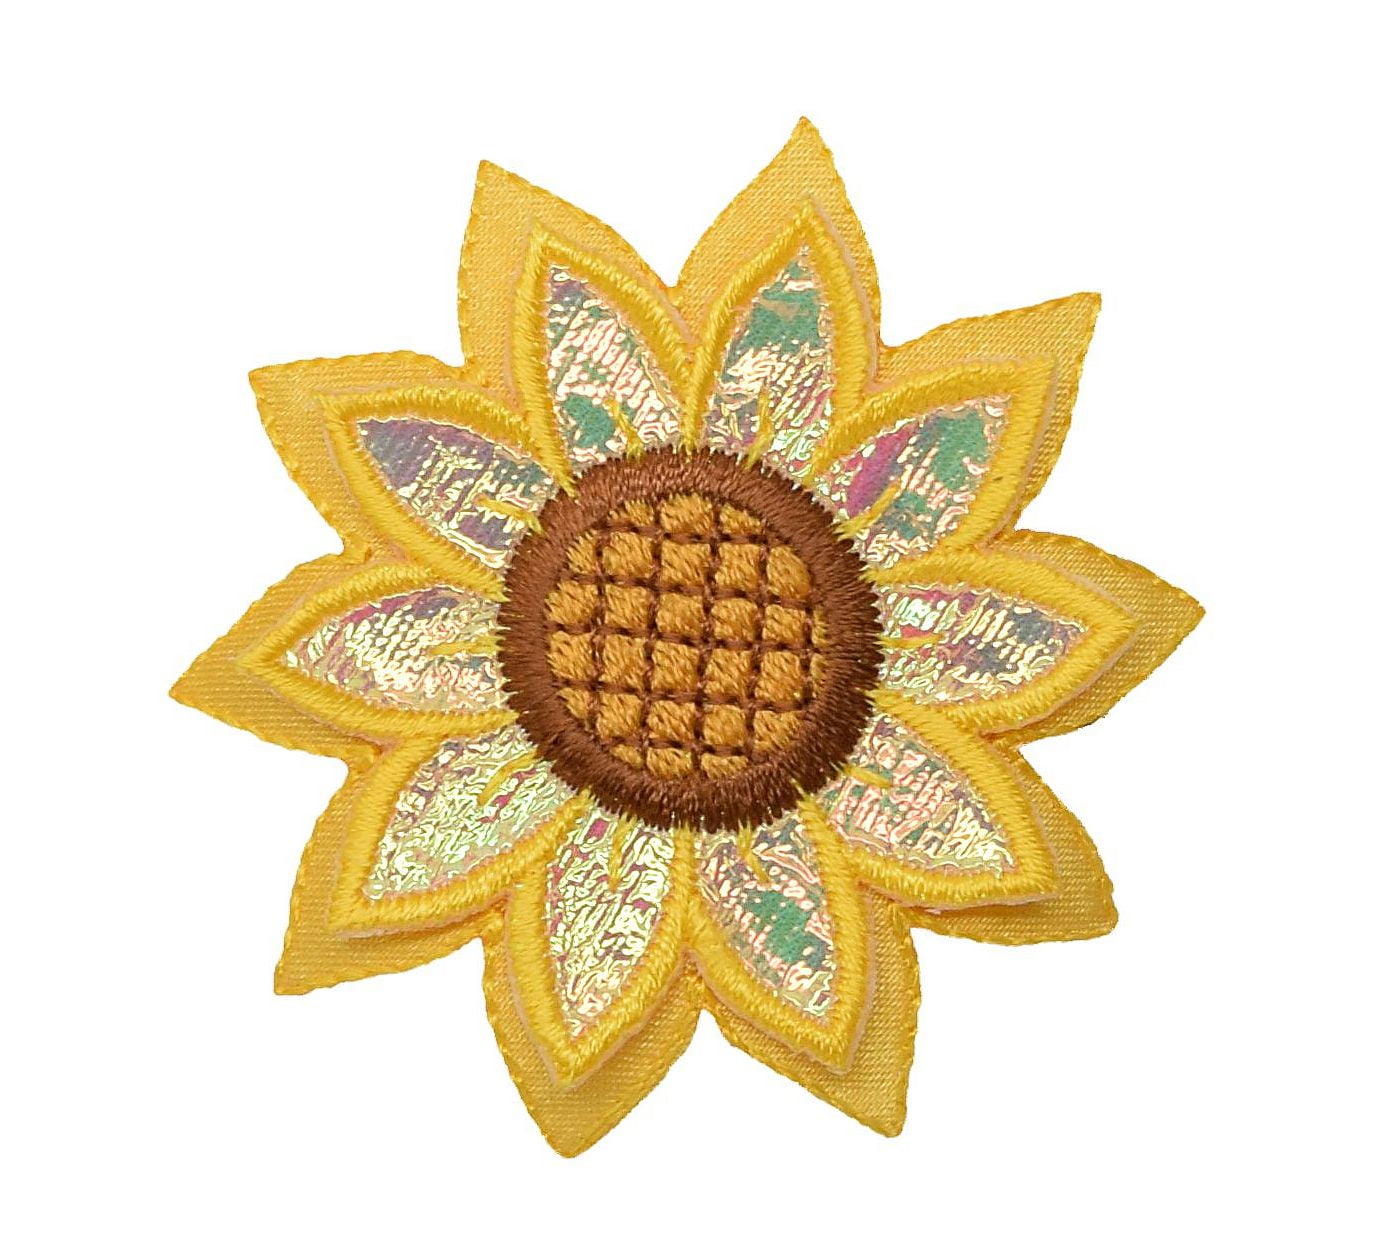 BROWN YELLOW FLOWER TRIMMING Embroidered Sew Iron On Cloth Patch Badge APPLIQUE 